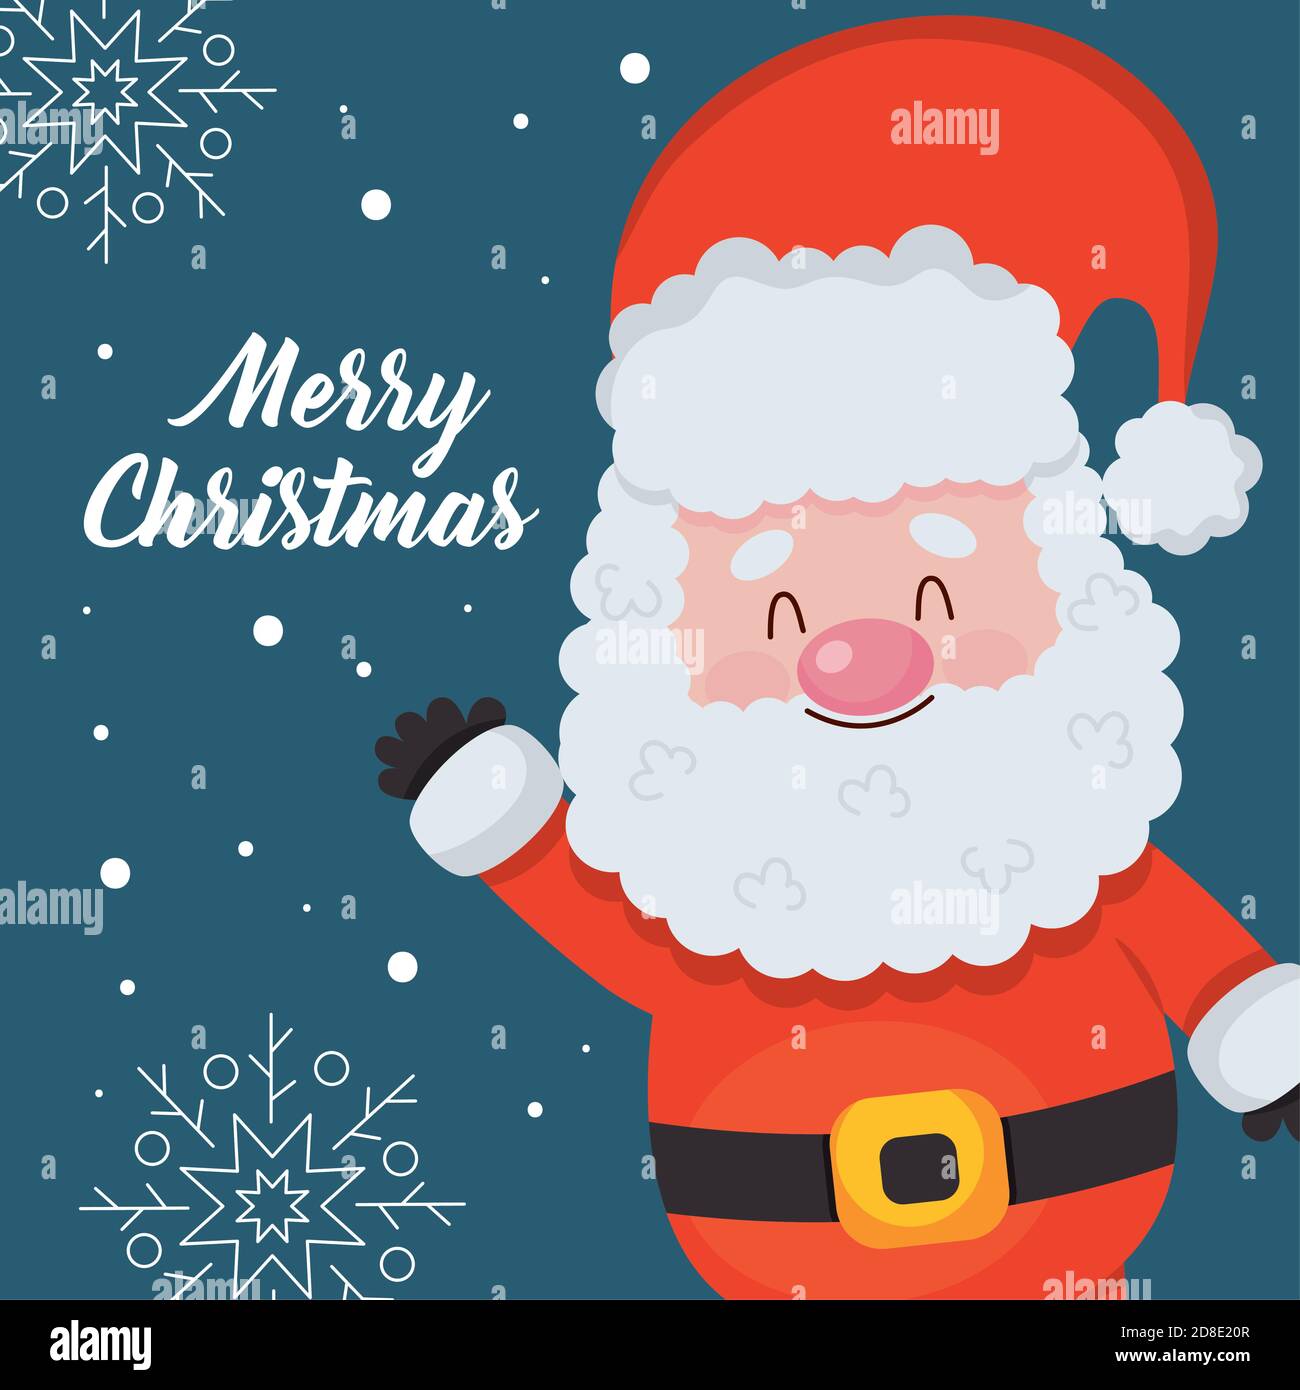 merry christmas design with cute santa claus icon over blue ...